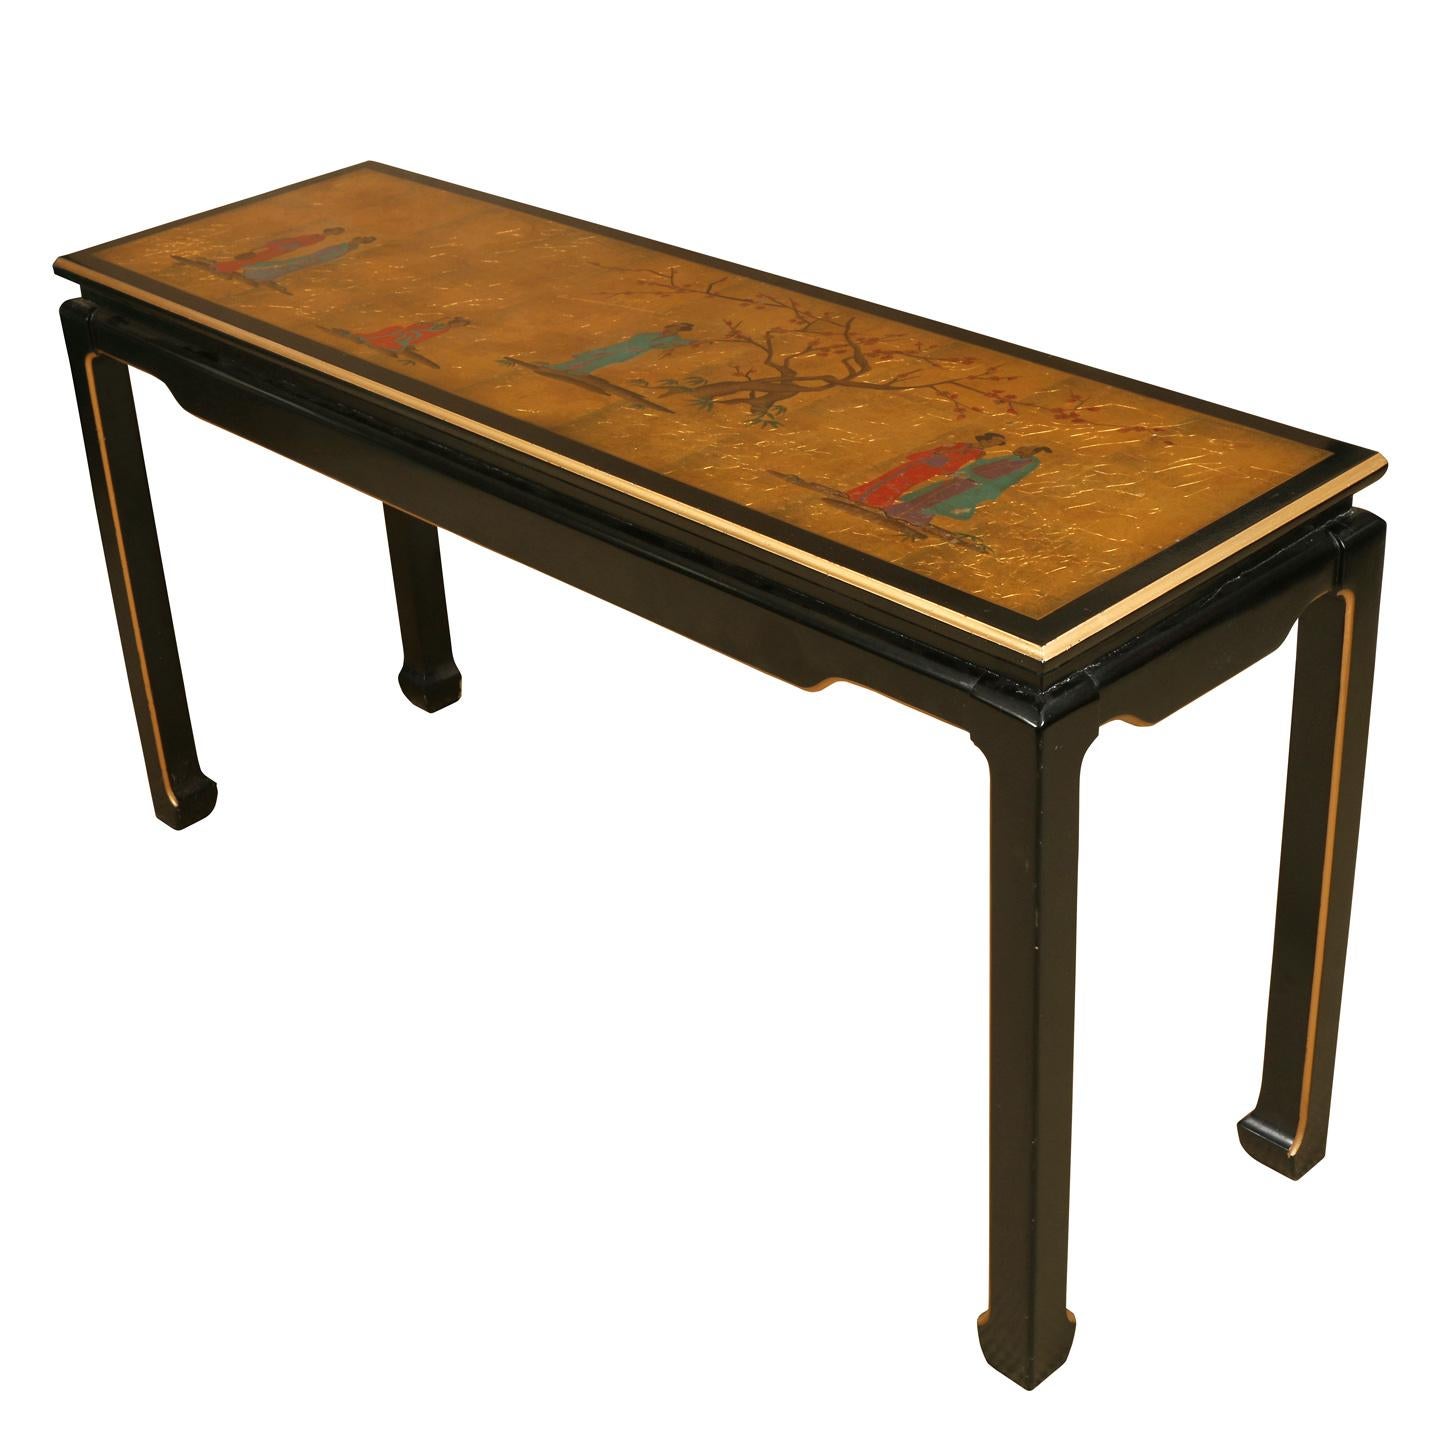 Gold leaf Asian console, circa 1960, with figures and garden landscape decoration to top. Table is ebonized with gold trim to legs.